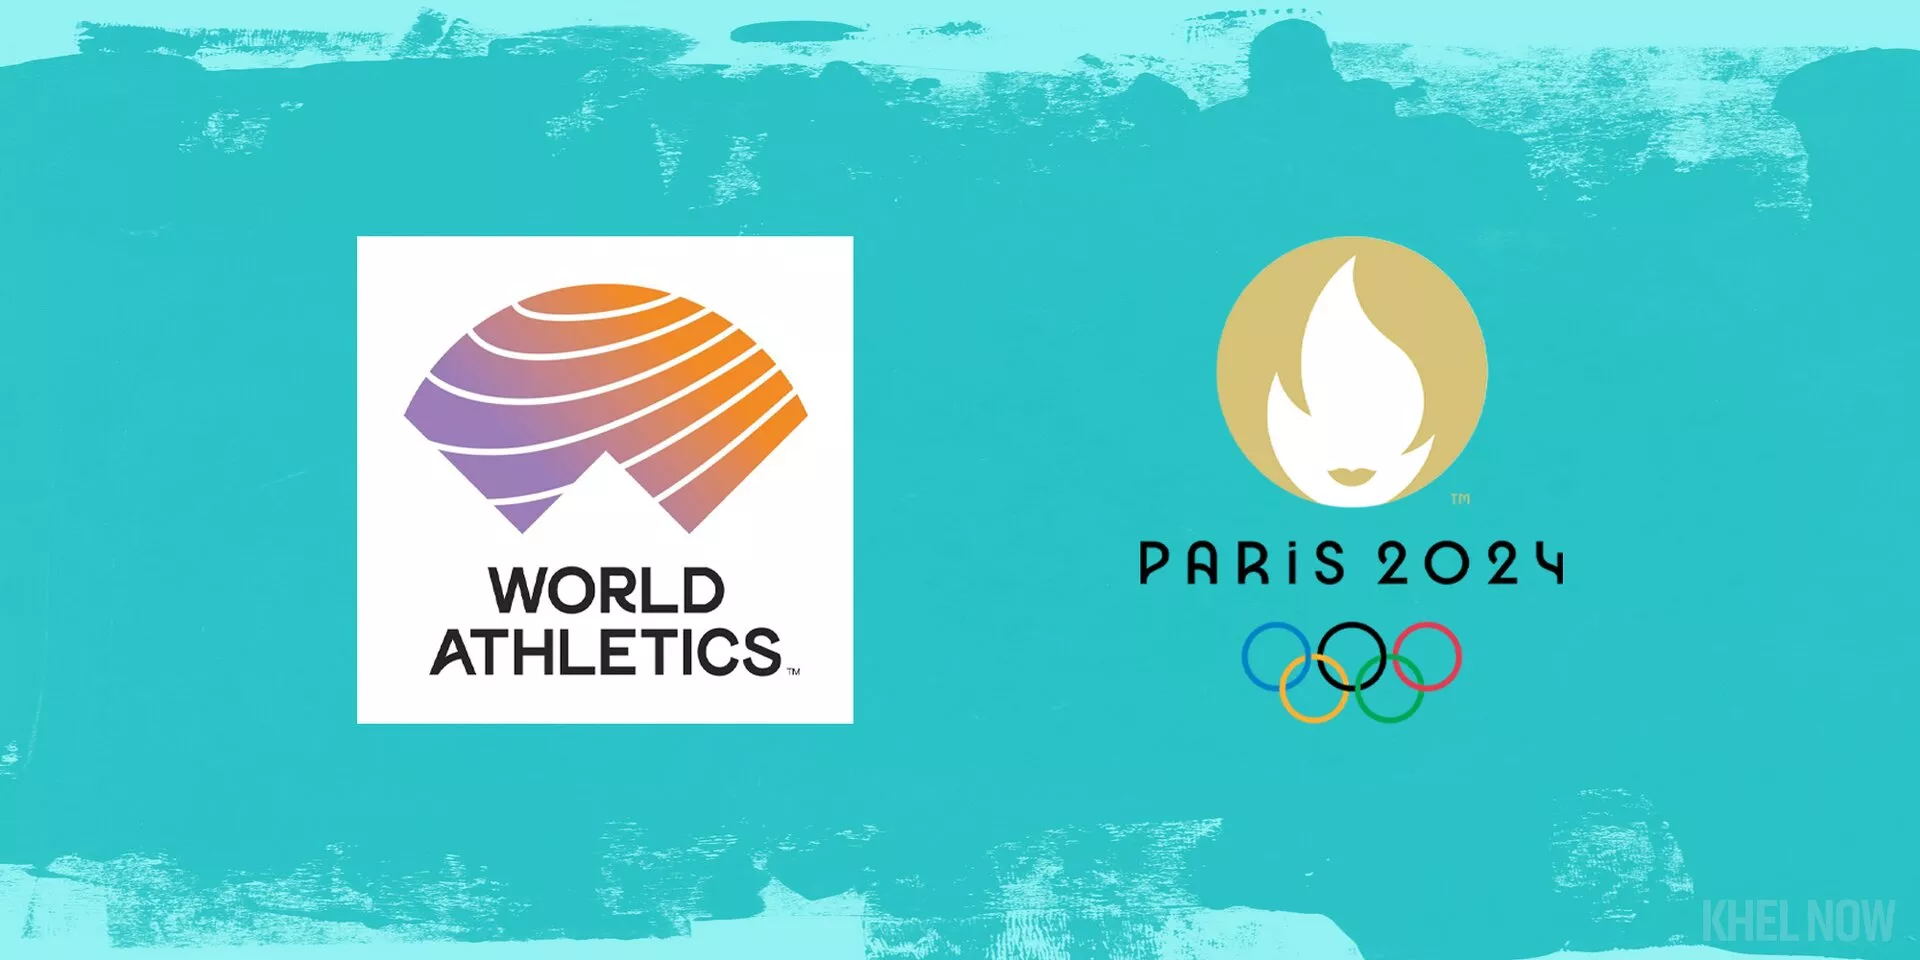 Paris 2024 Olympic Games: repechage rounds to be introduced in track races  by World Athletics